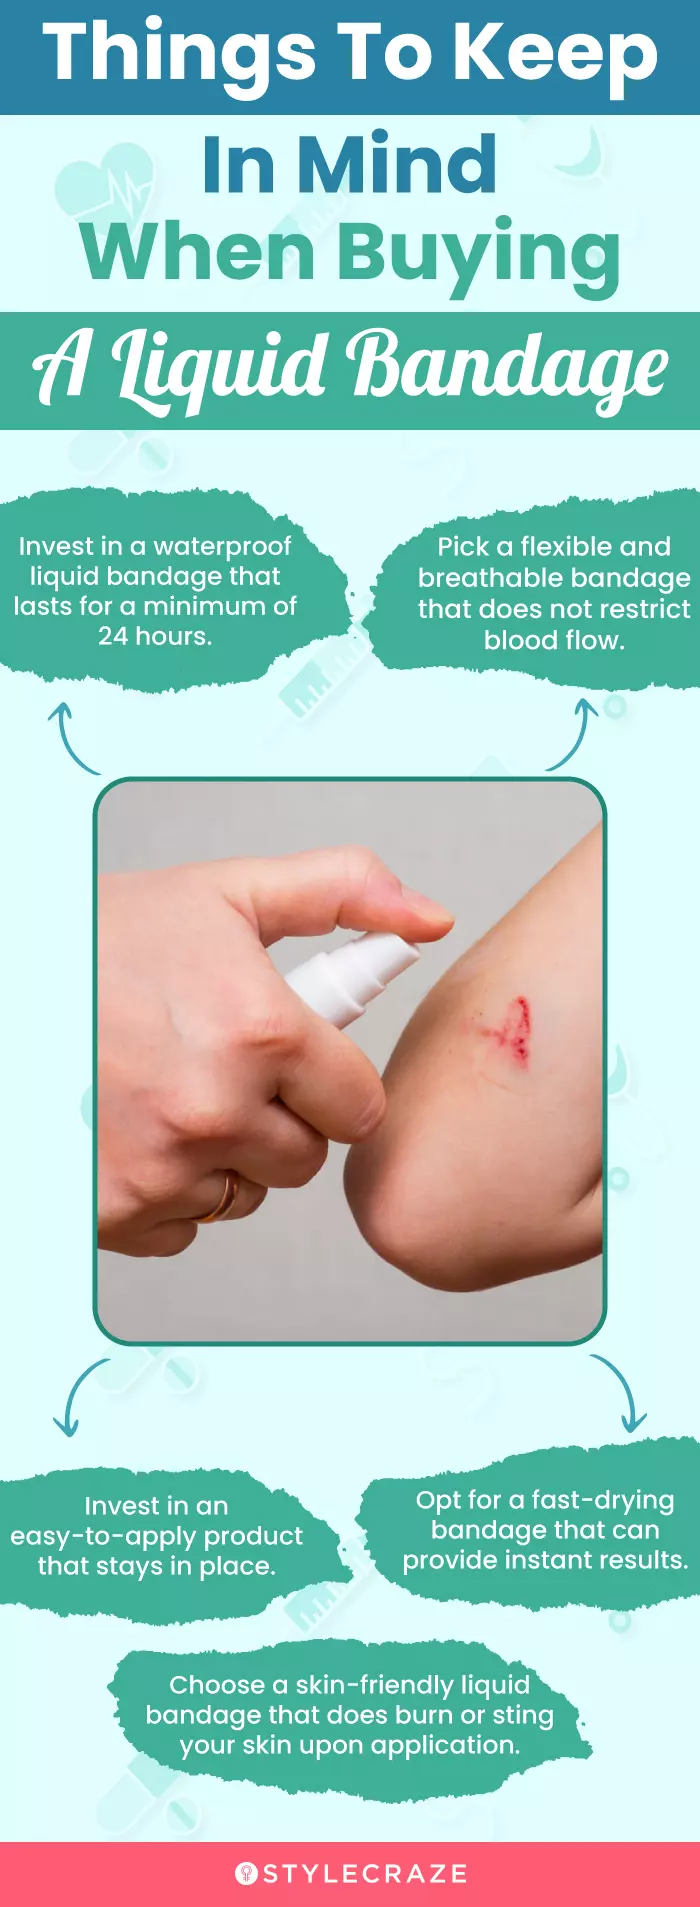 Things To Keep In Mind When Buying A Liquid Bandage (infographic)